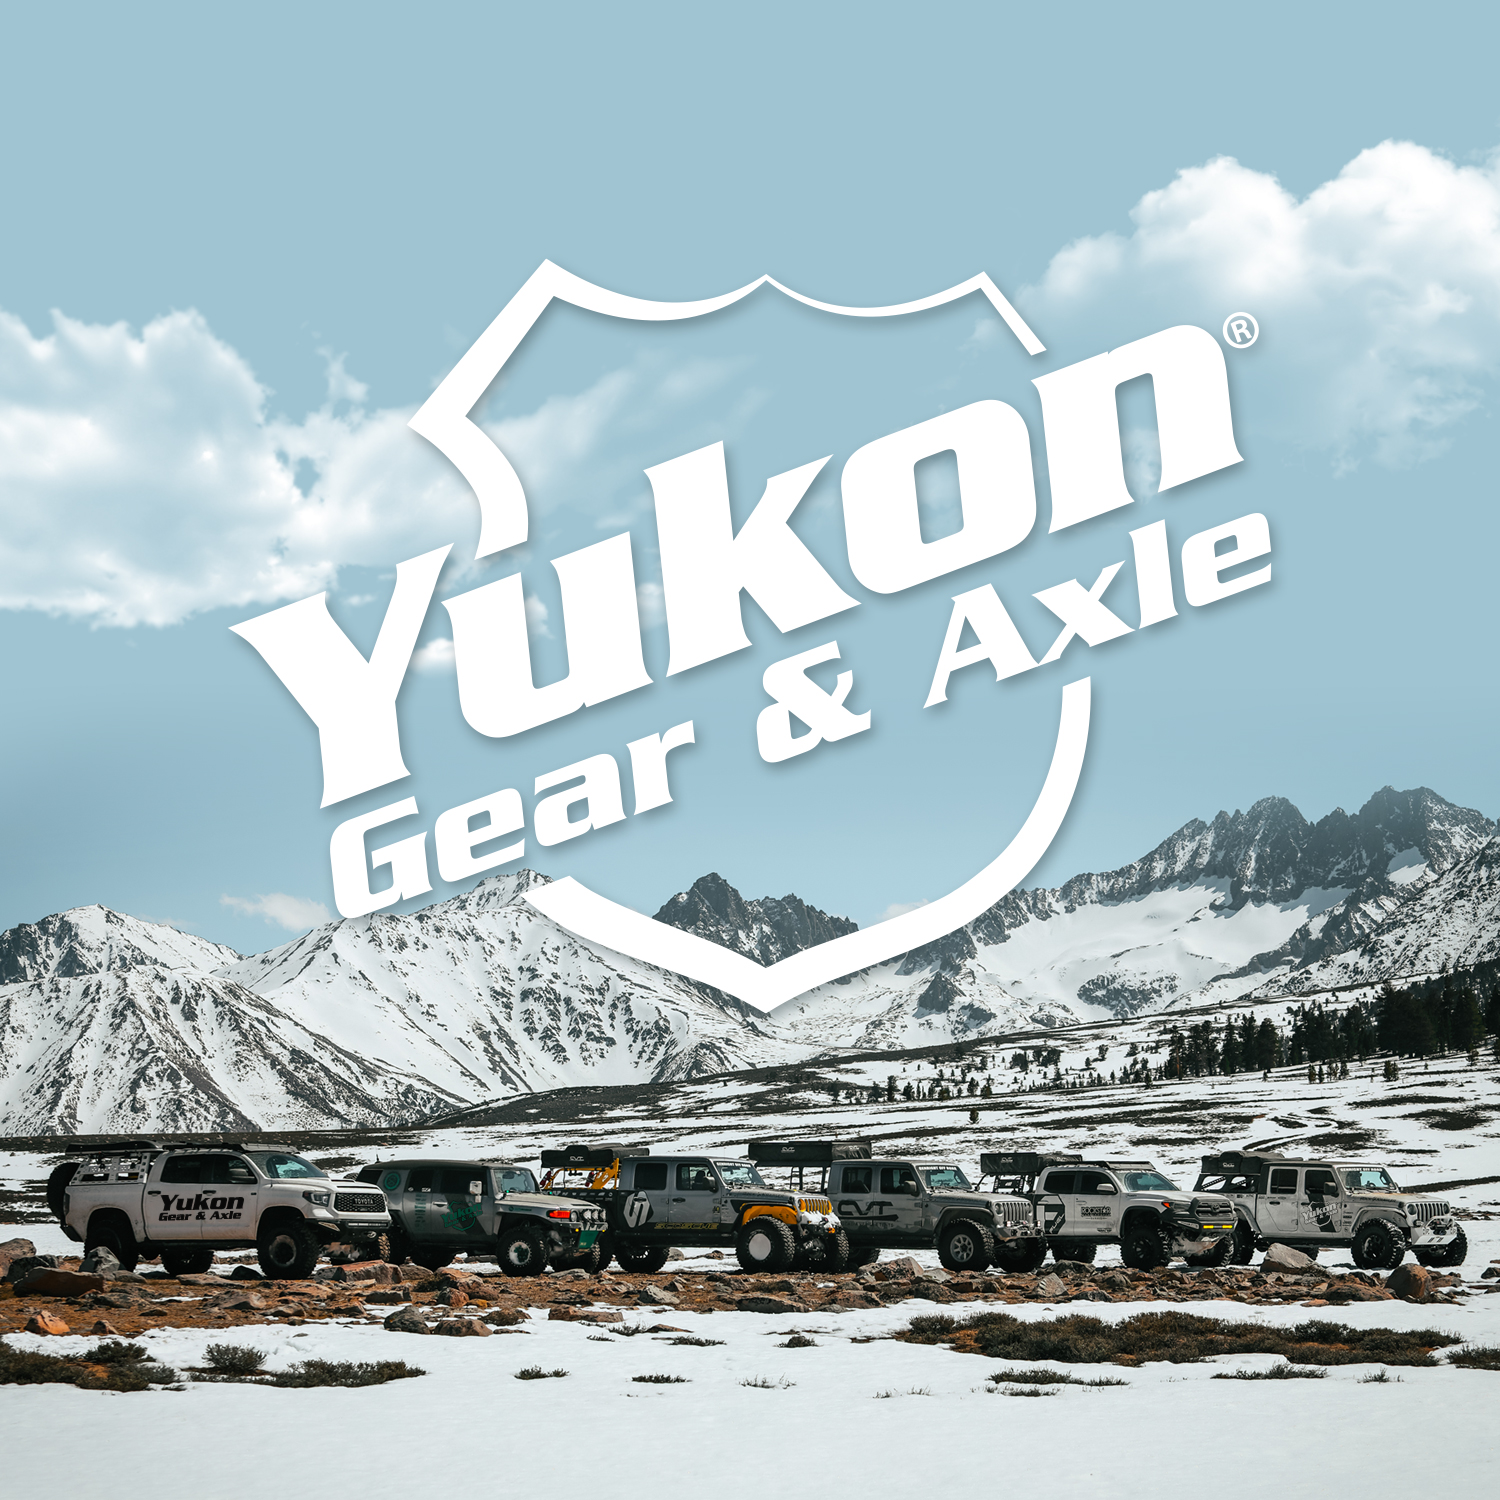 Yukon replacement outer stub axle for Dana 60 and 70 